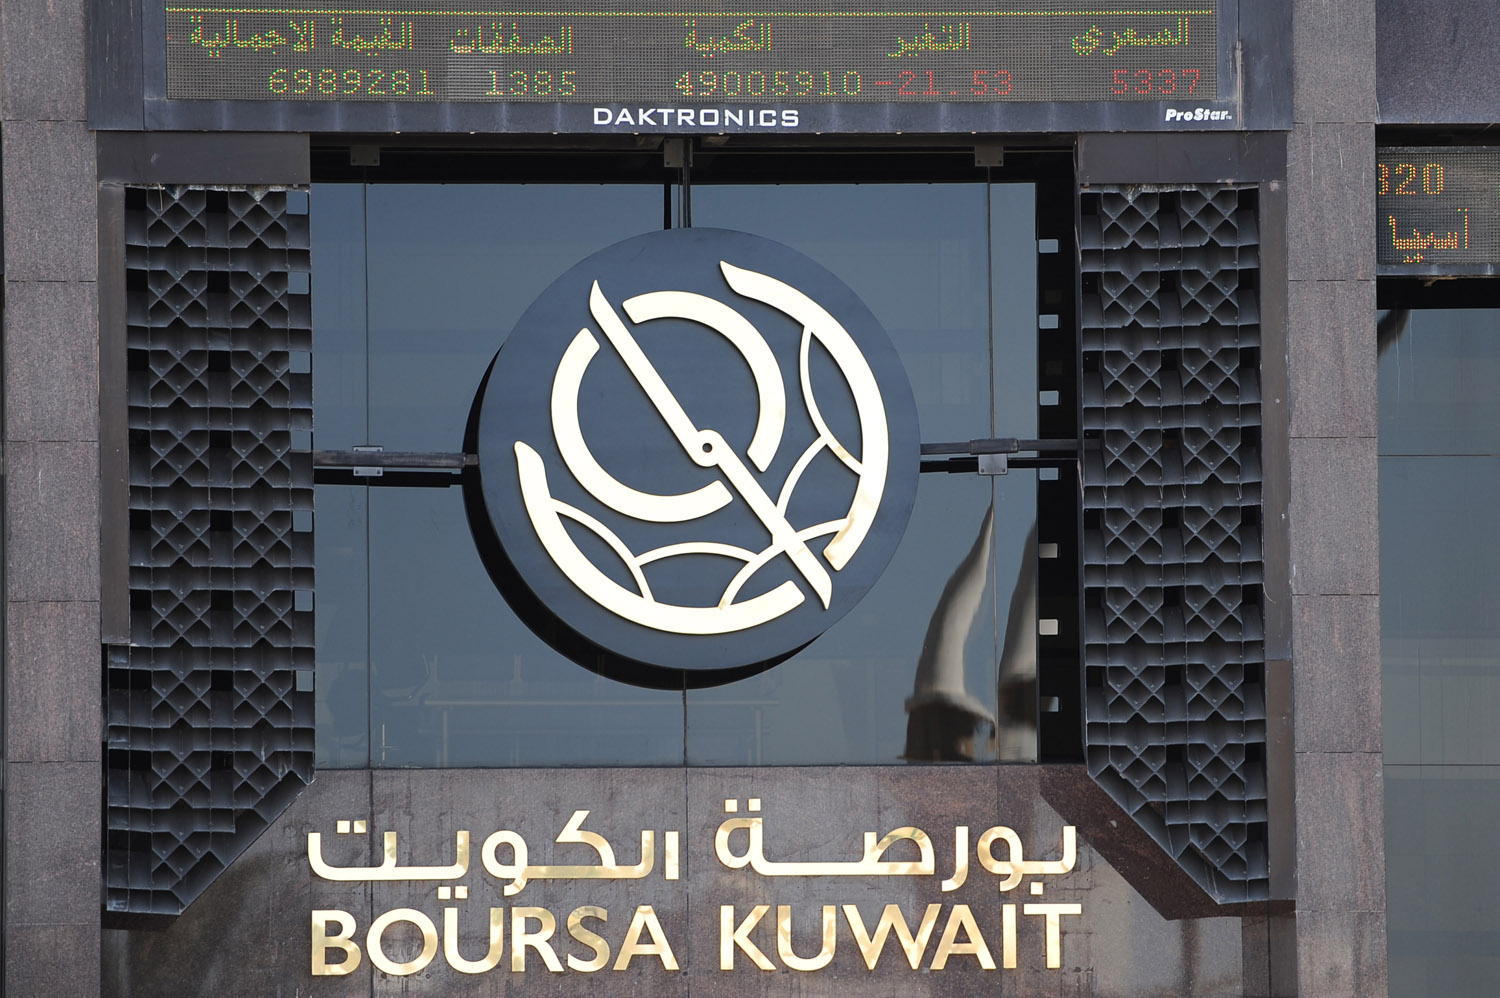 Kuwait bourse ends trading Sunday on mixed boards                                                                                                                                                                                                         